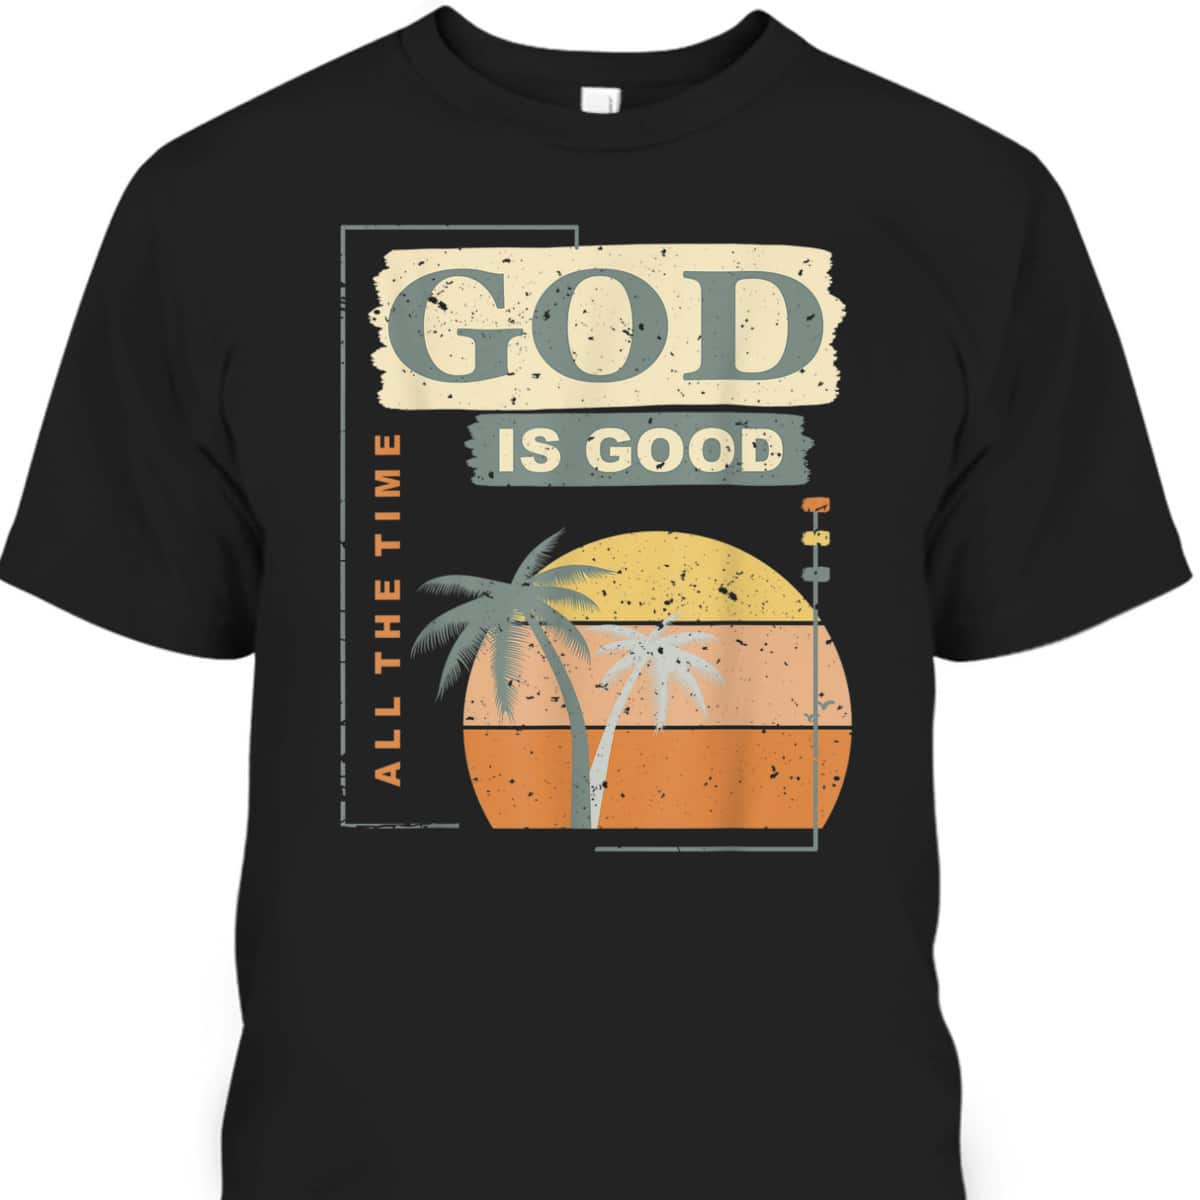 Cool Retro Christian Saying God Is Good All The Time T-Shirt